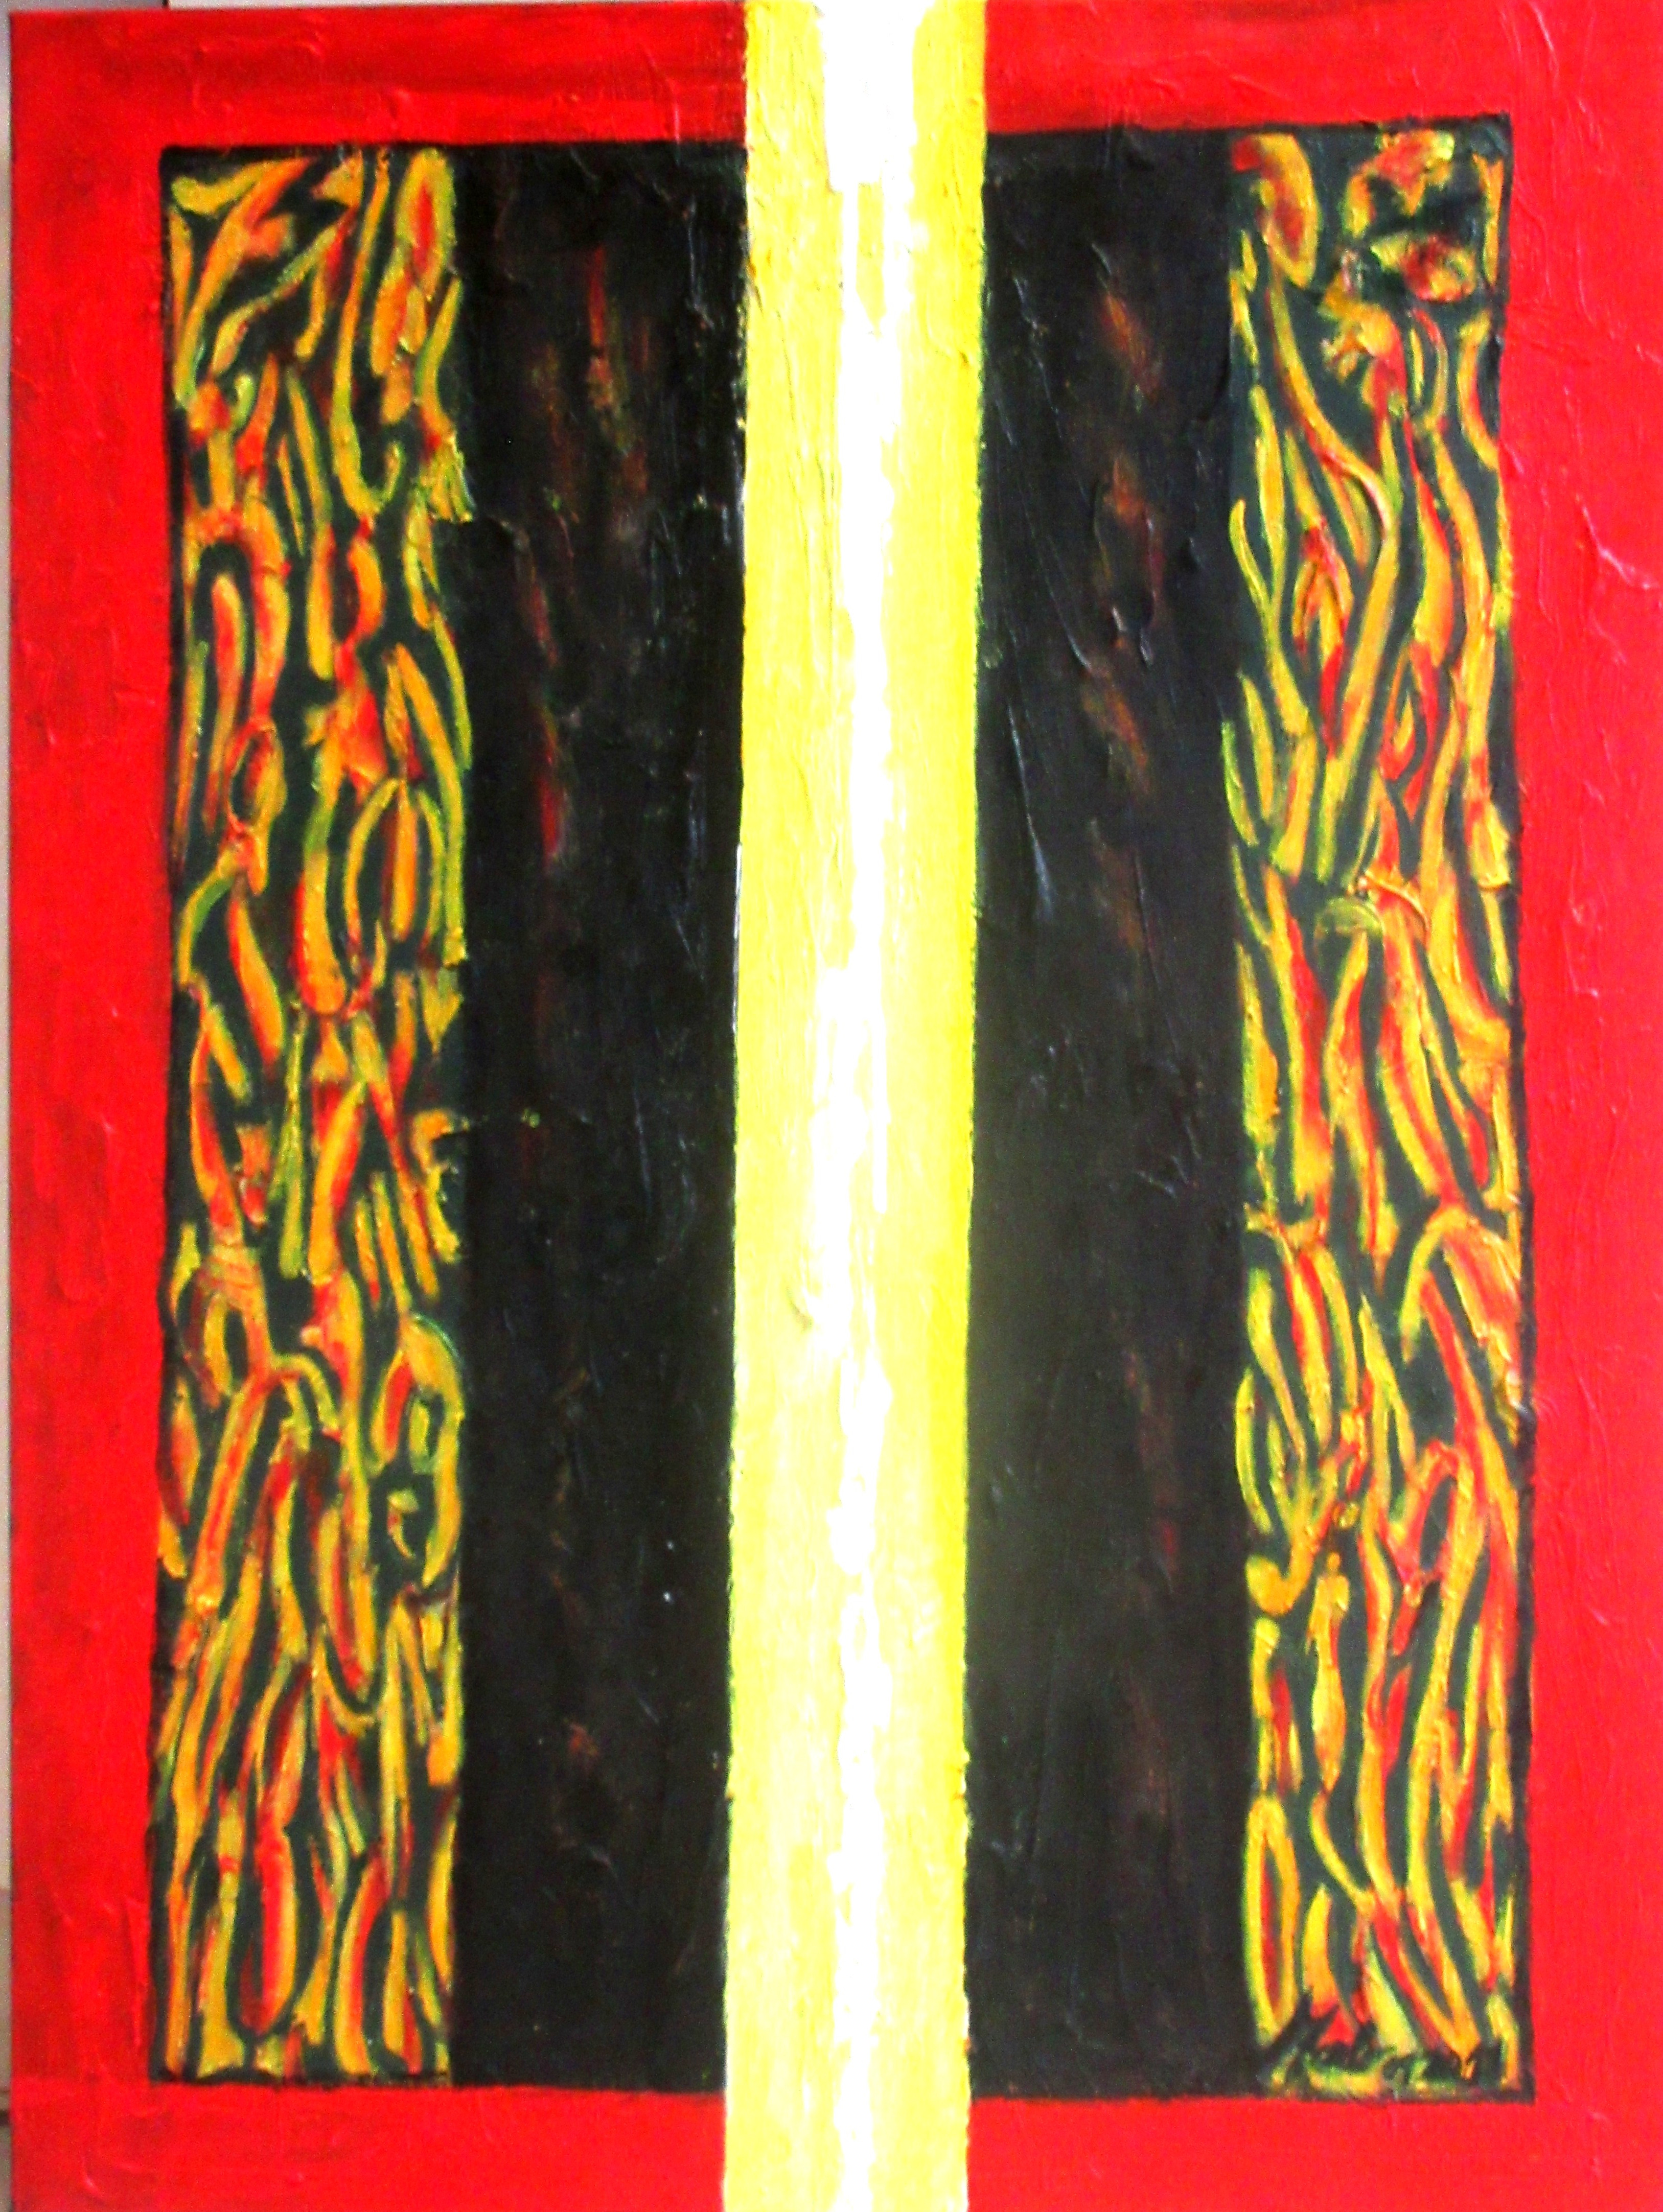 Conflicting-situations-The-breakthrough.-Arlic-on-canvas-80-cm-H-x-60-cm-W.09.2011.jpg